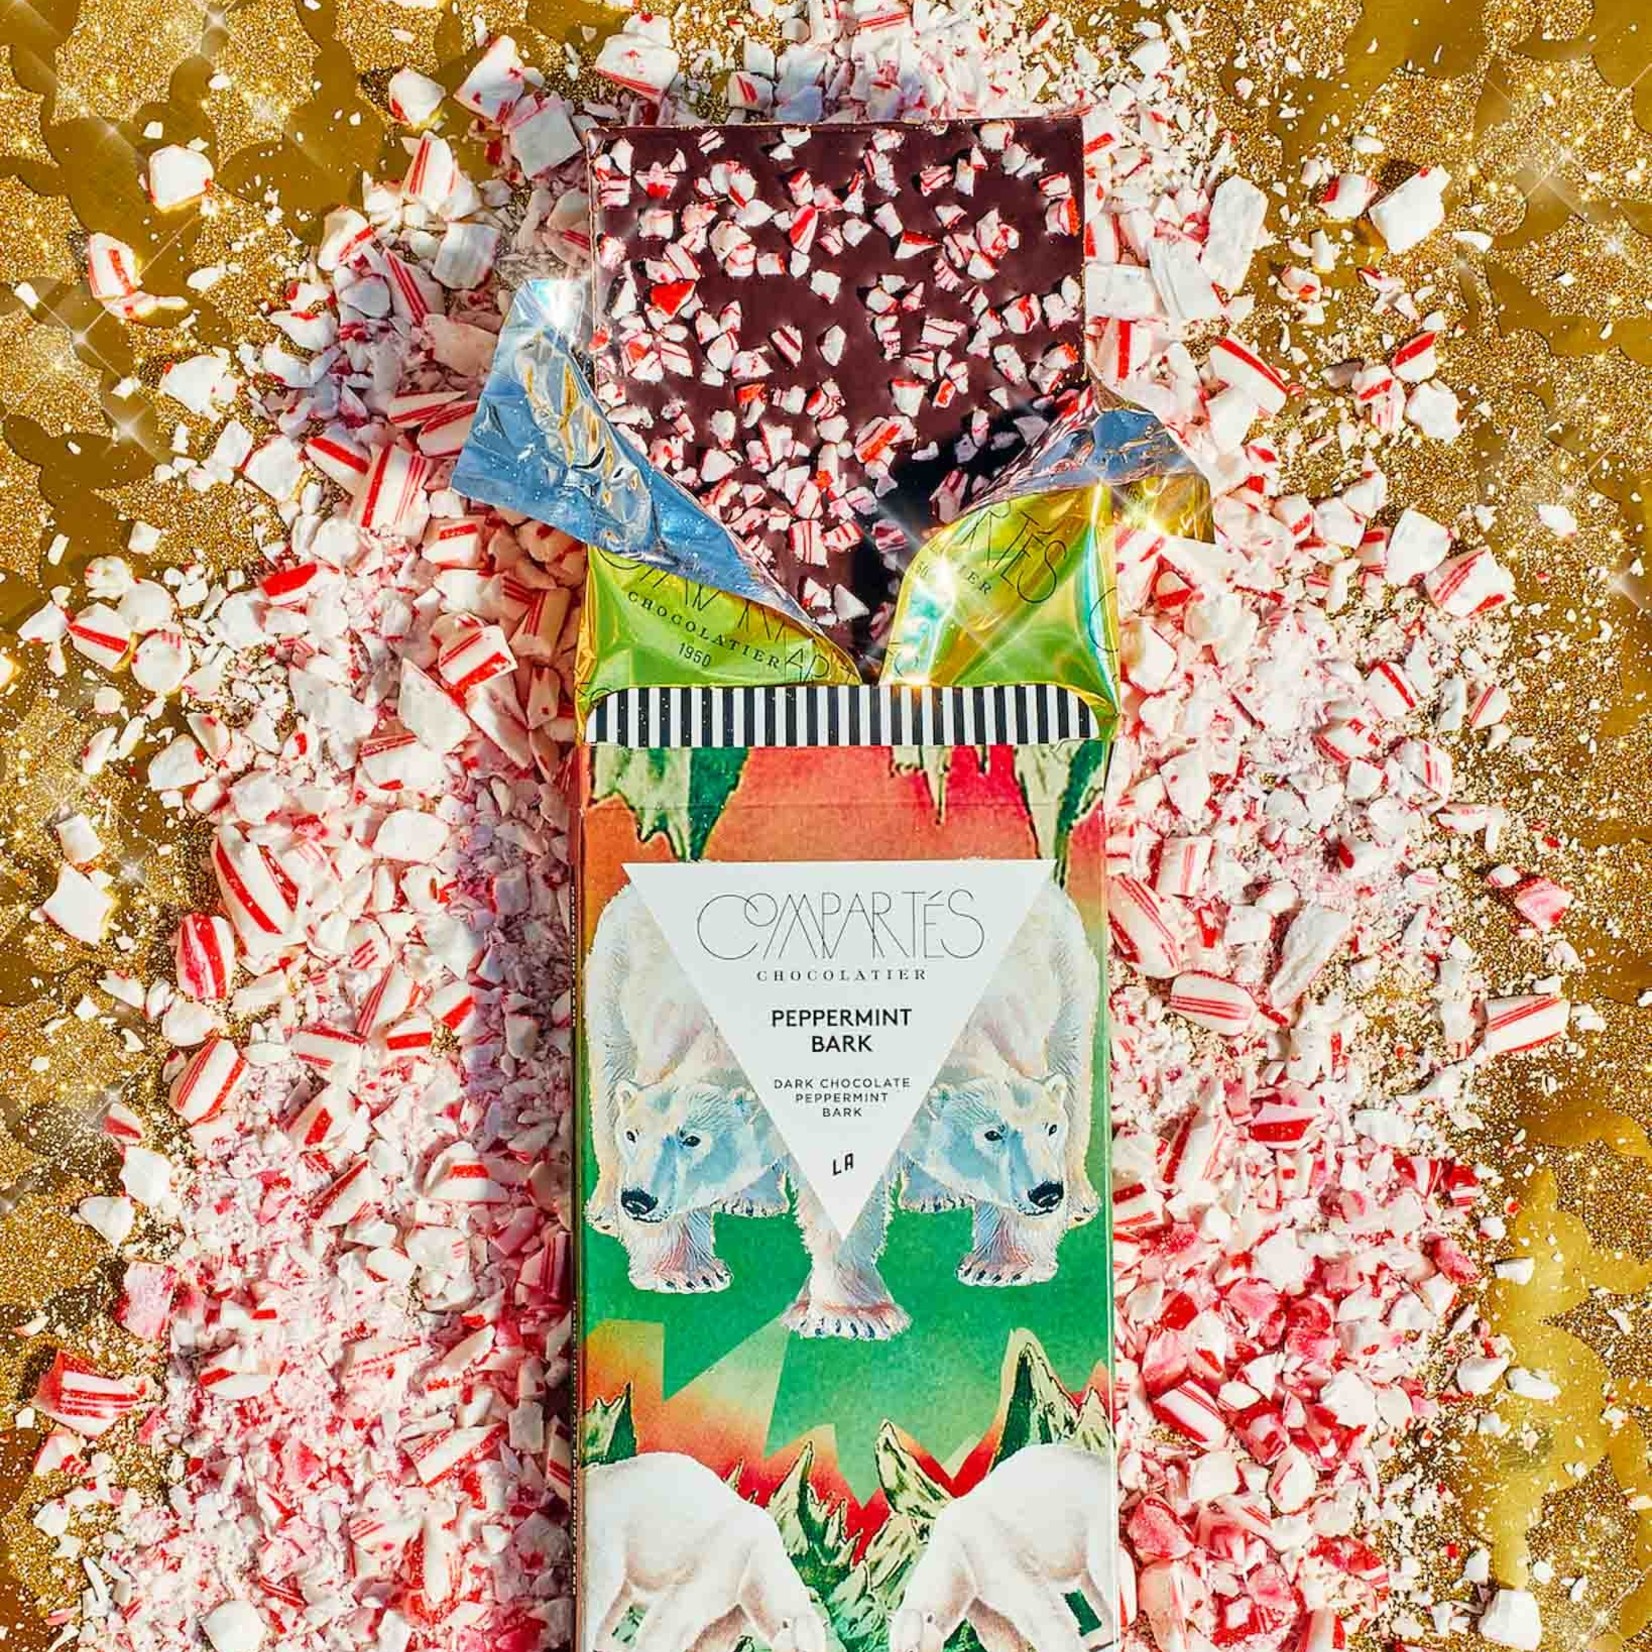 Compartes Chocolate Compartes Peppermint Bark Chocolate Bar